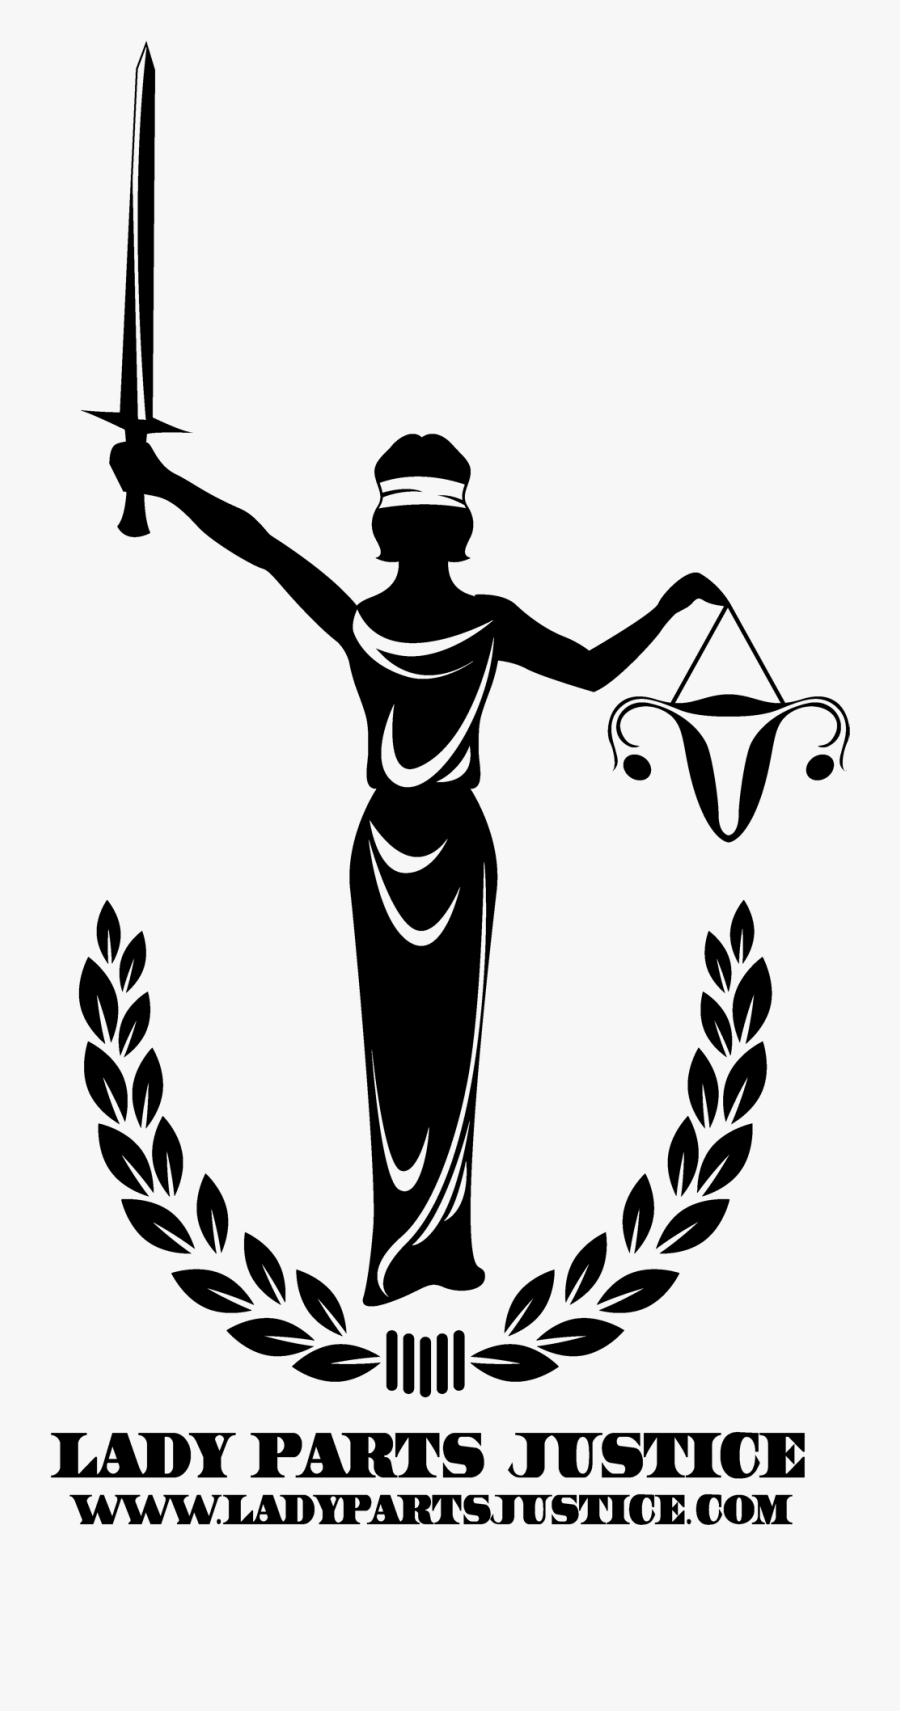 So Excited To Welcome Lady Parts Justice To The Roster - Symbol Of Human Rights, Transparent Clipart